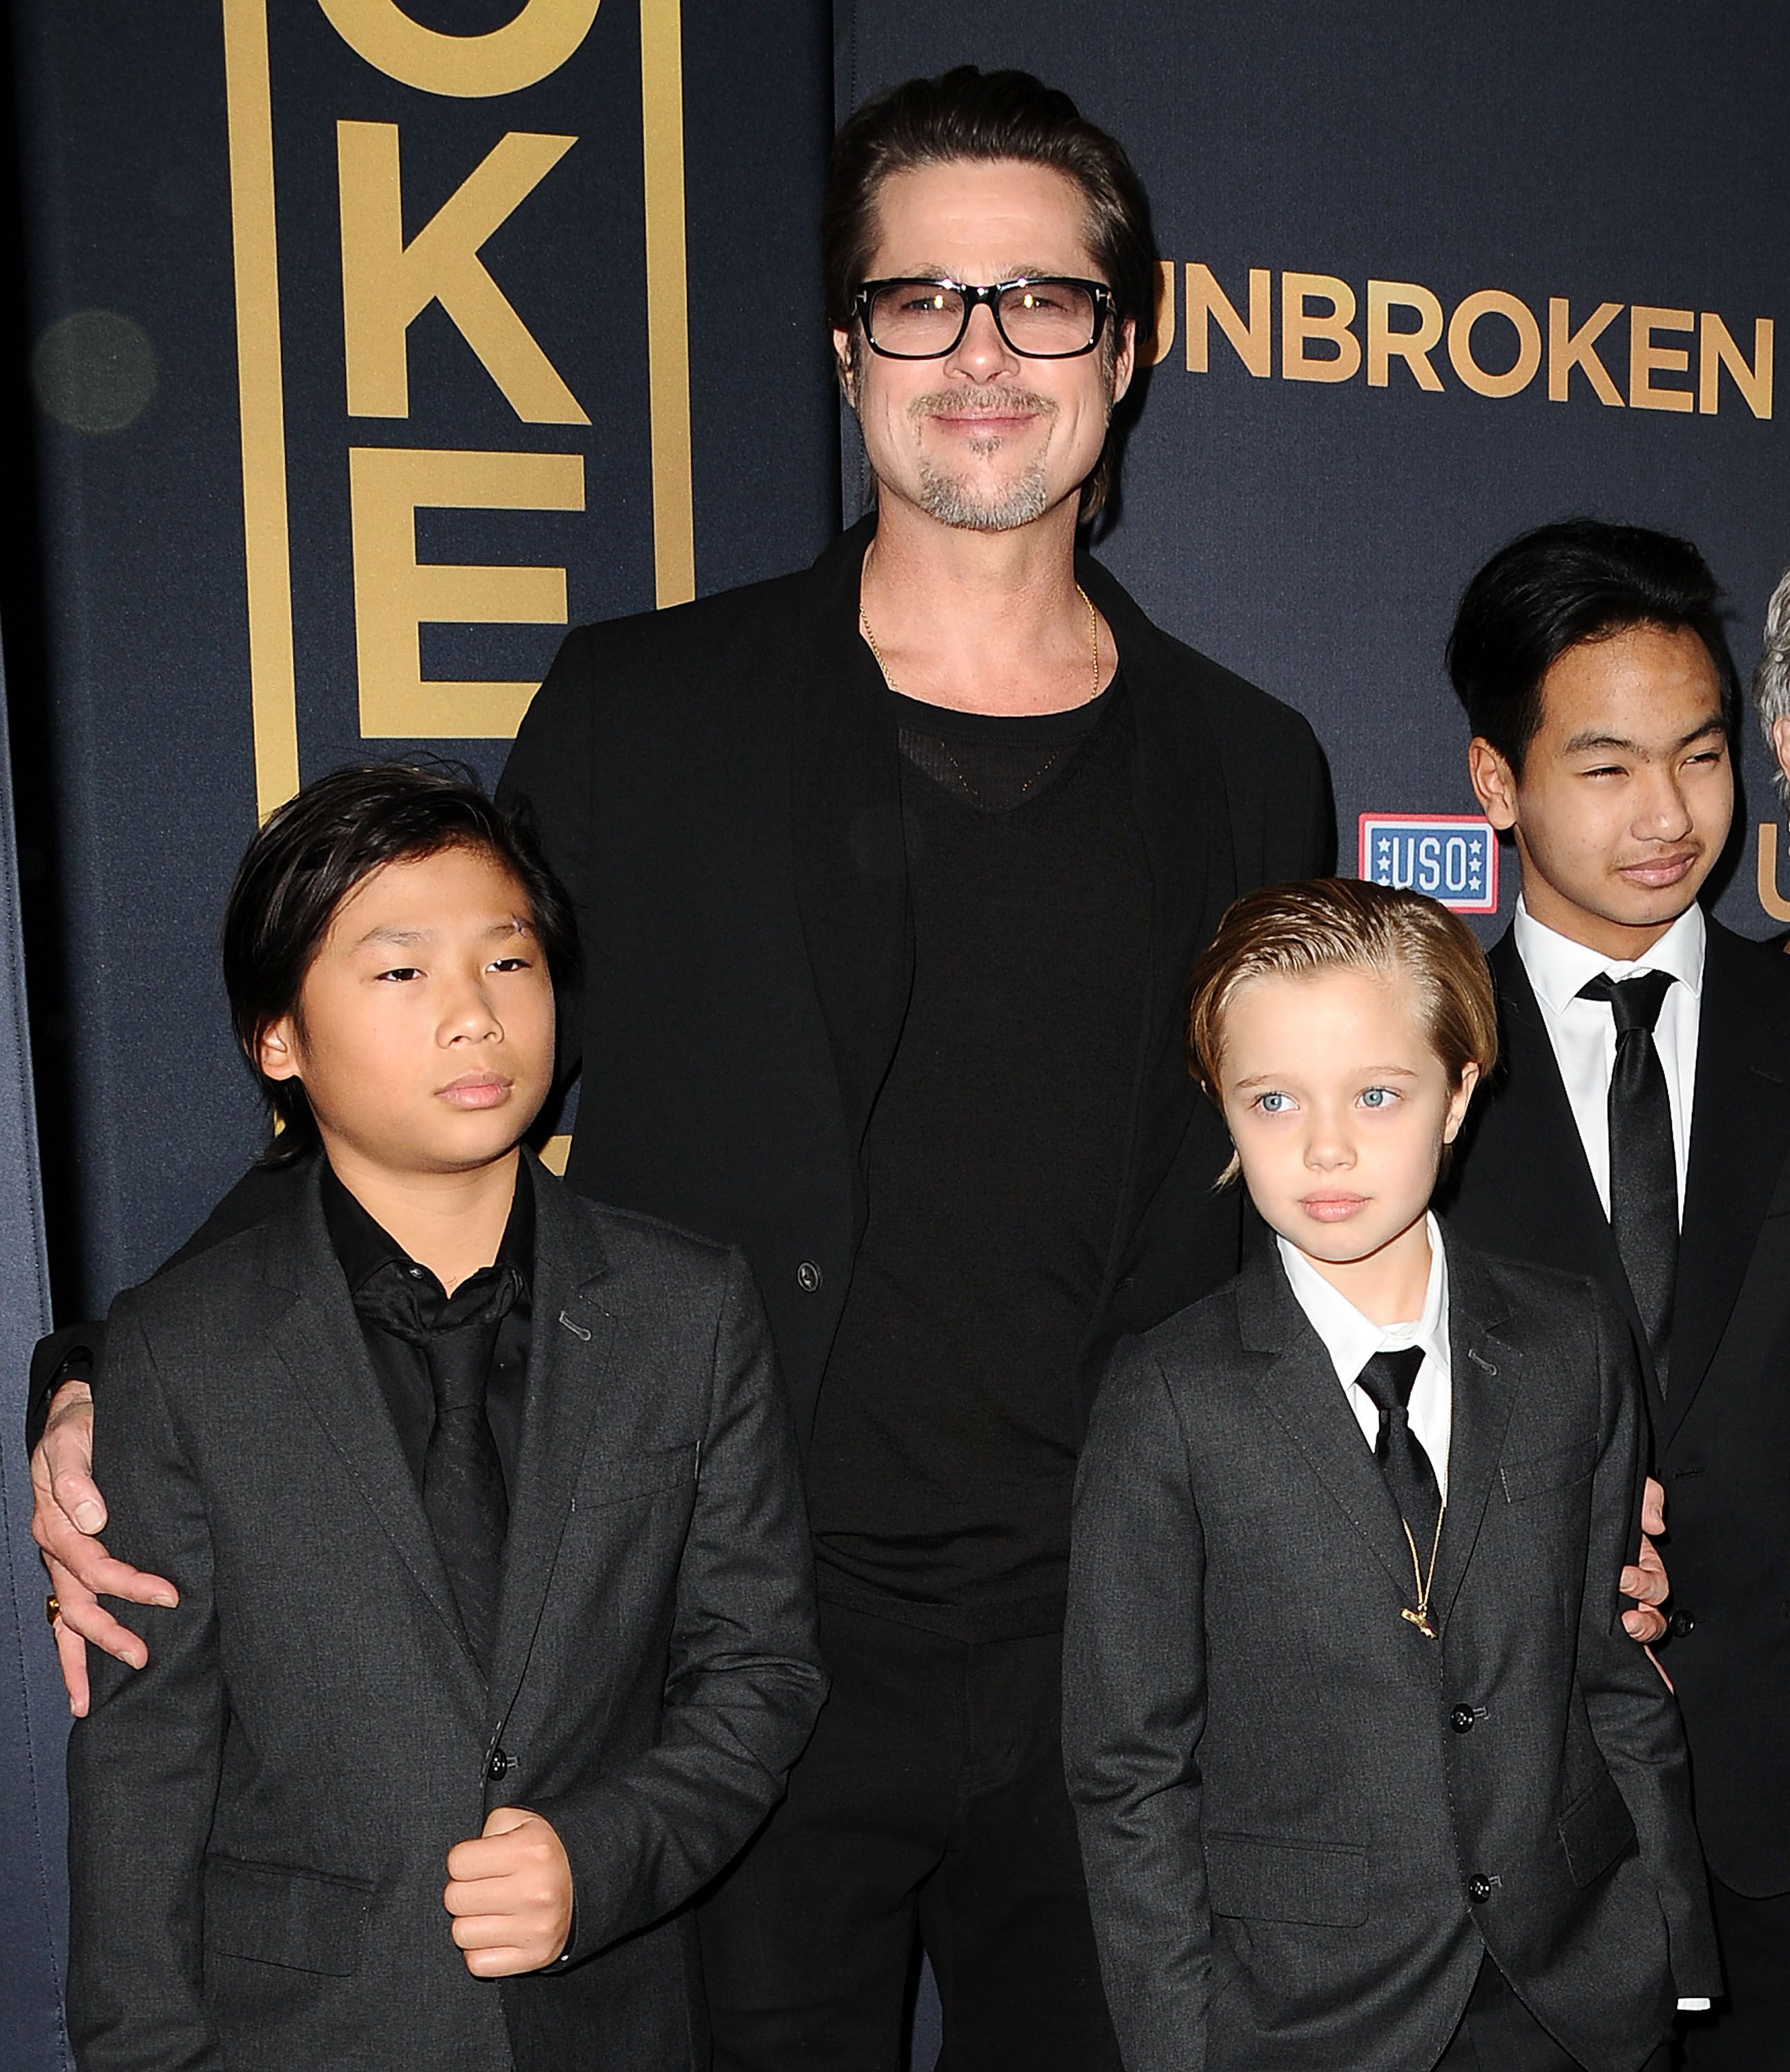 Brad Pitt, Pax Thien Jolie-Pitt, Shiloh Nouvel Jolie-Pitt, and Maddox Jolie-Pitt during the premiere of "Unbroken" at TCL Chinese Theatre IMAX on December 15, 2014, in Hollywood, California. | Source: Getty Images